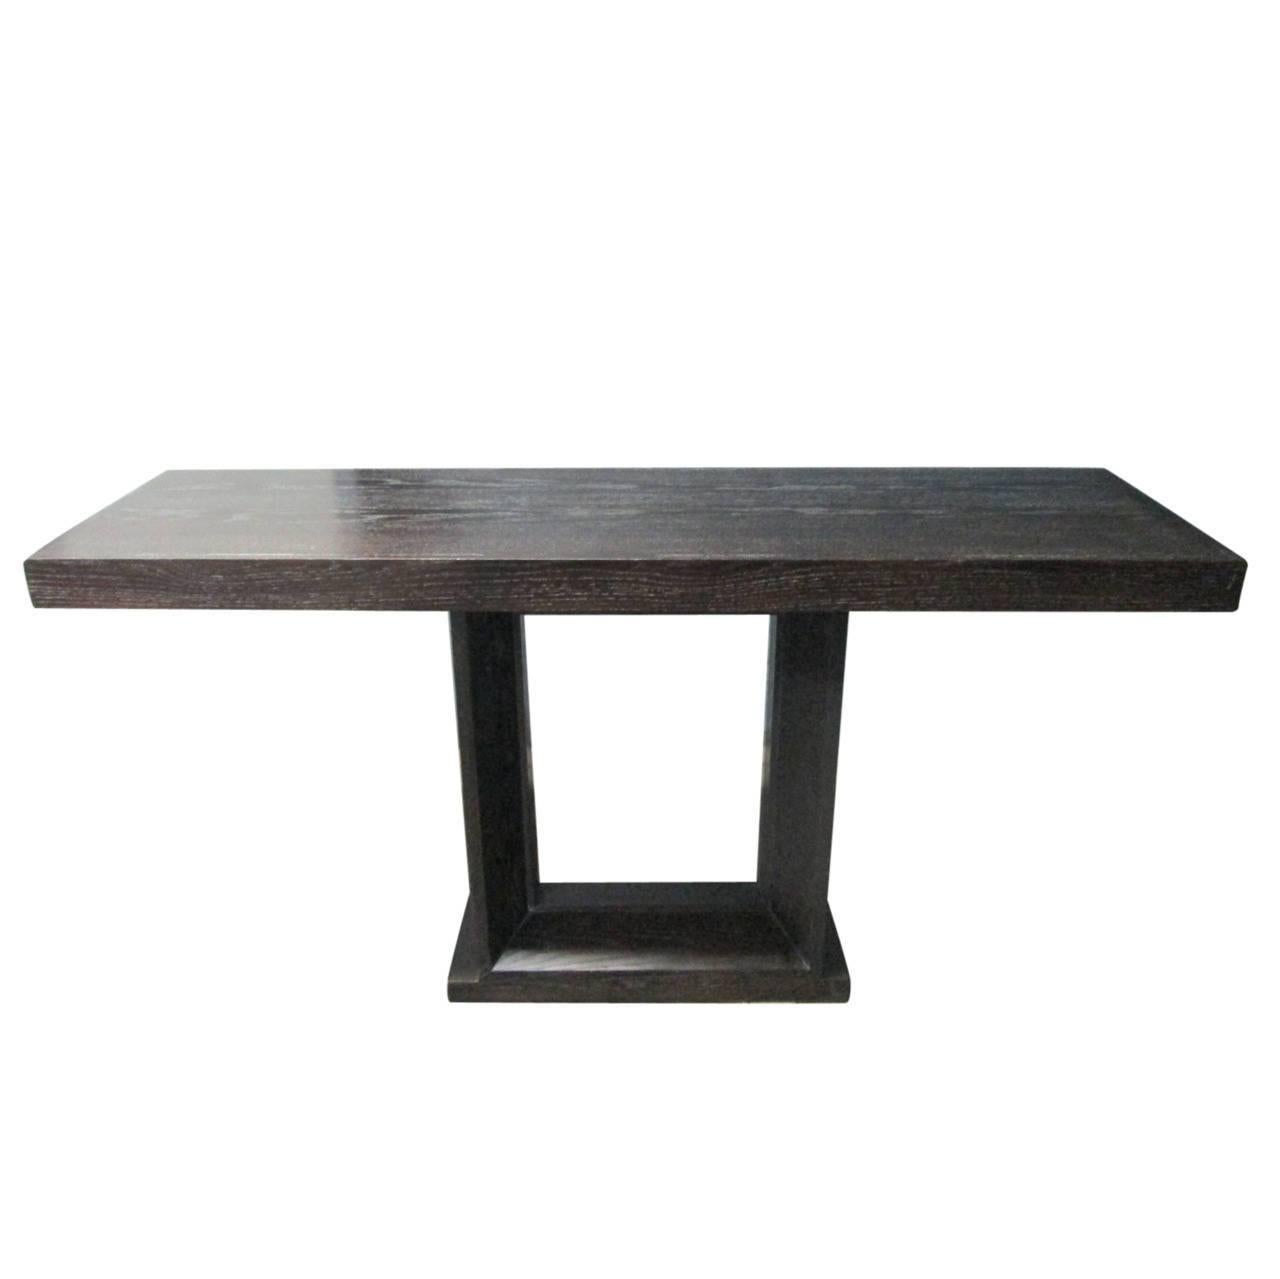 Cerused oak console table with a painted finish. Nice open square base. 